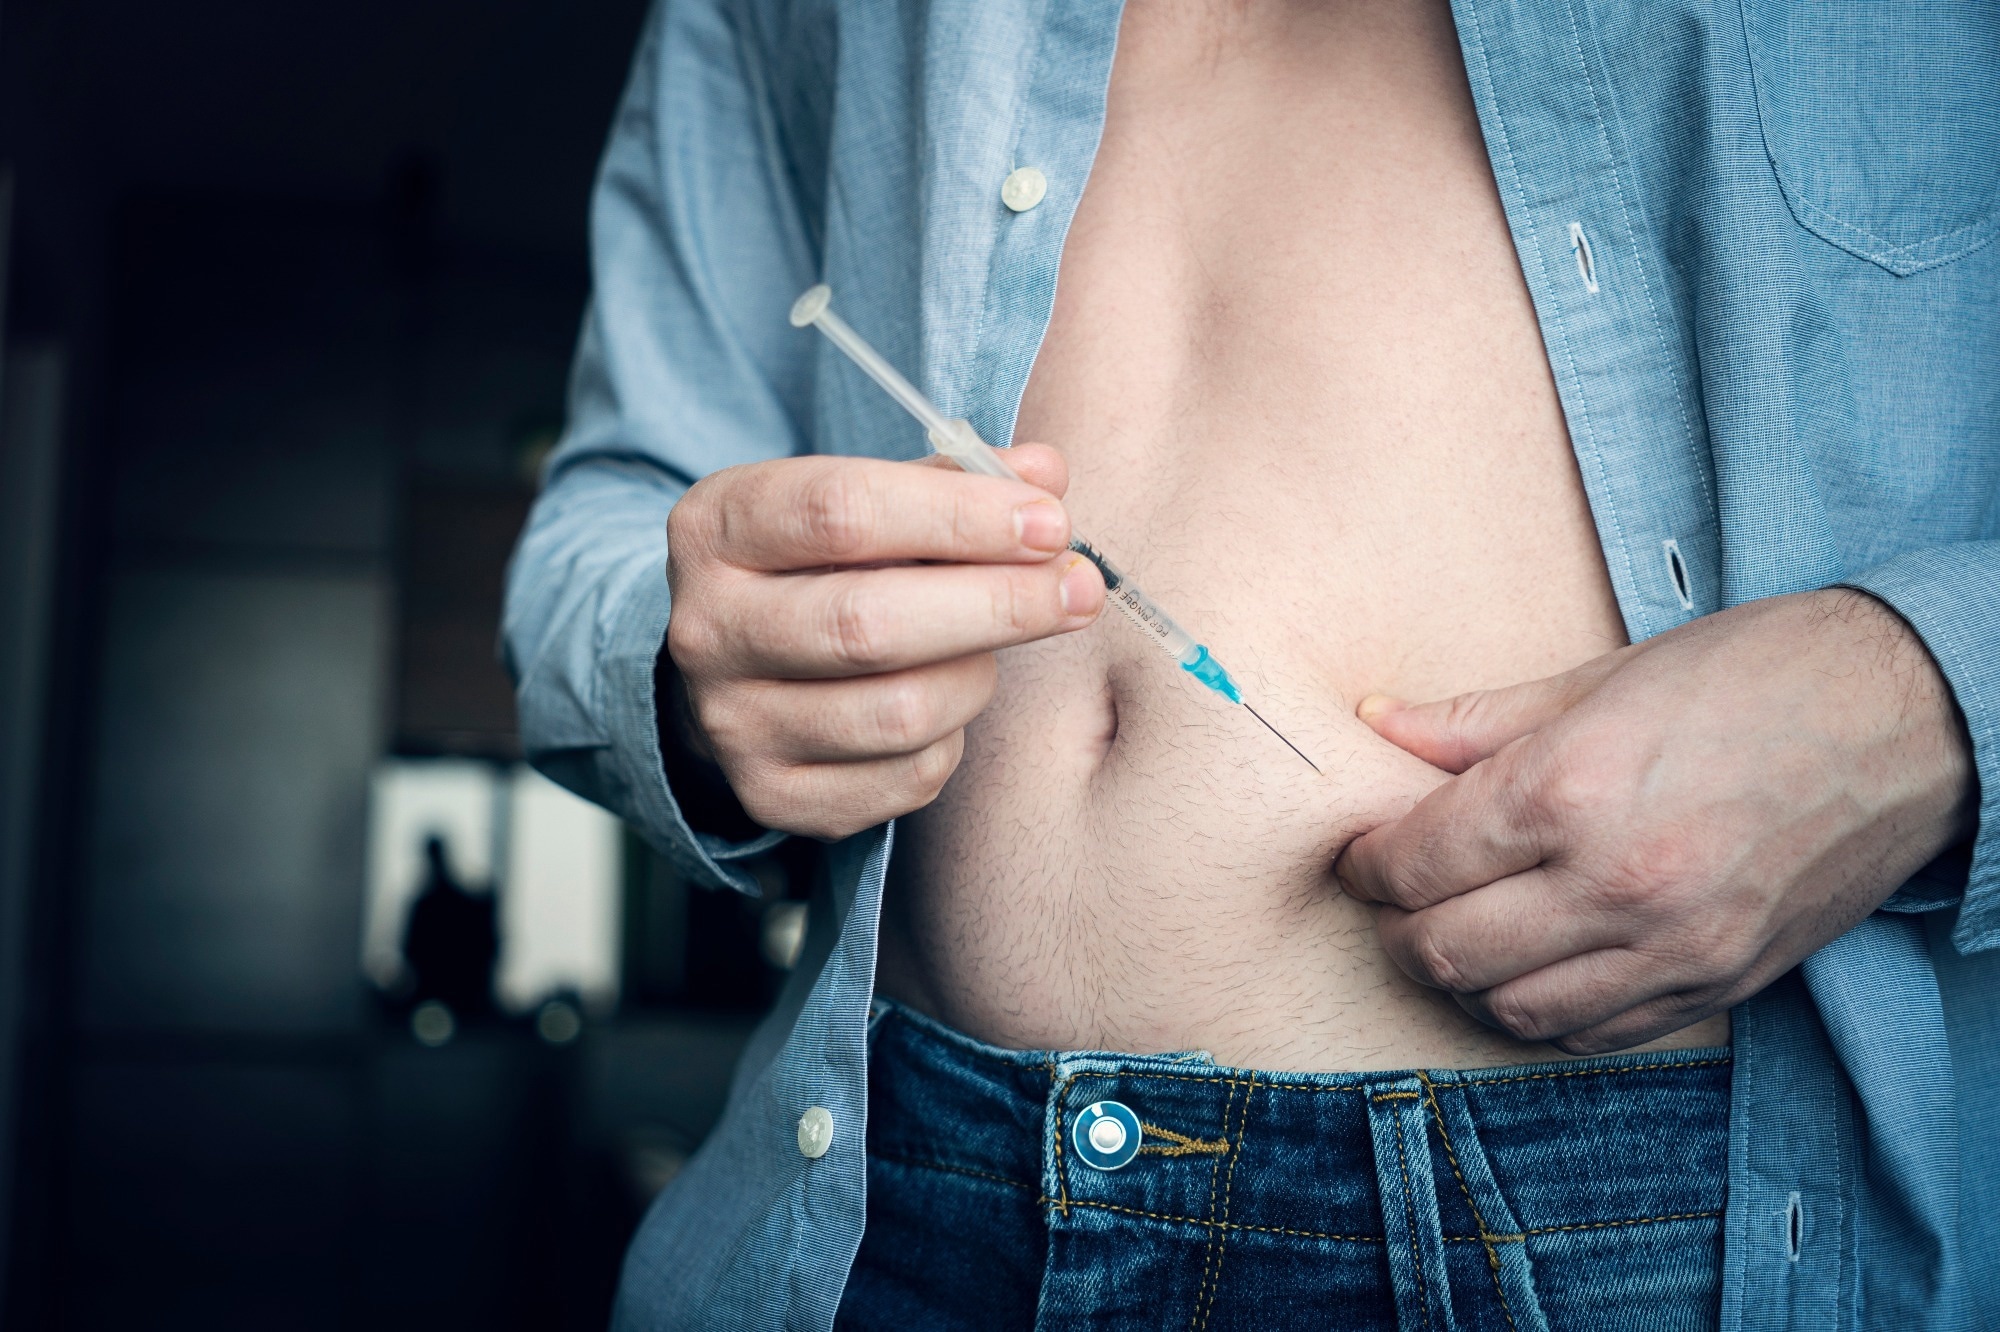 Study: Risk of Gastrointestinal Adverse Events Associated With Glucagon-Like Peptide-1 Receptor Agonists for Weight Loss (Research letter). Image Credit: Melnikov Dmitriy / Shutterstock.com